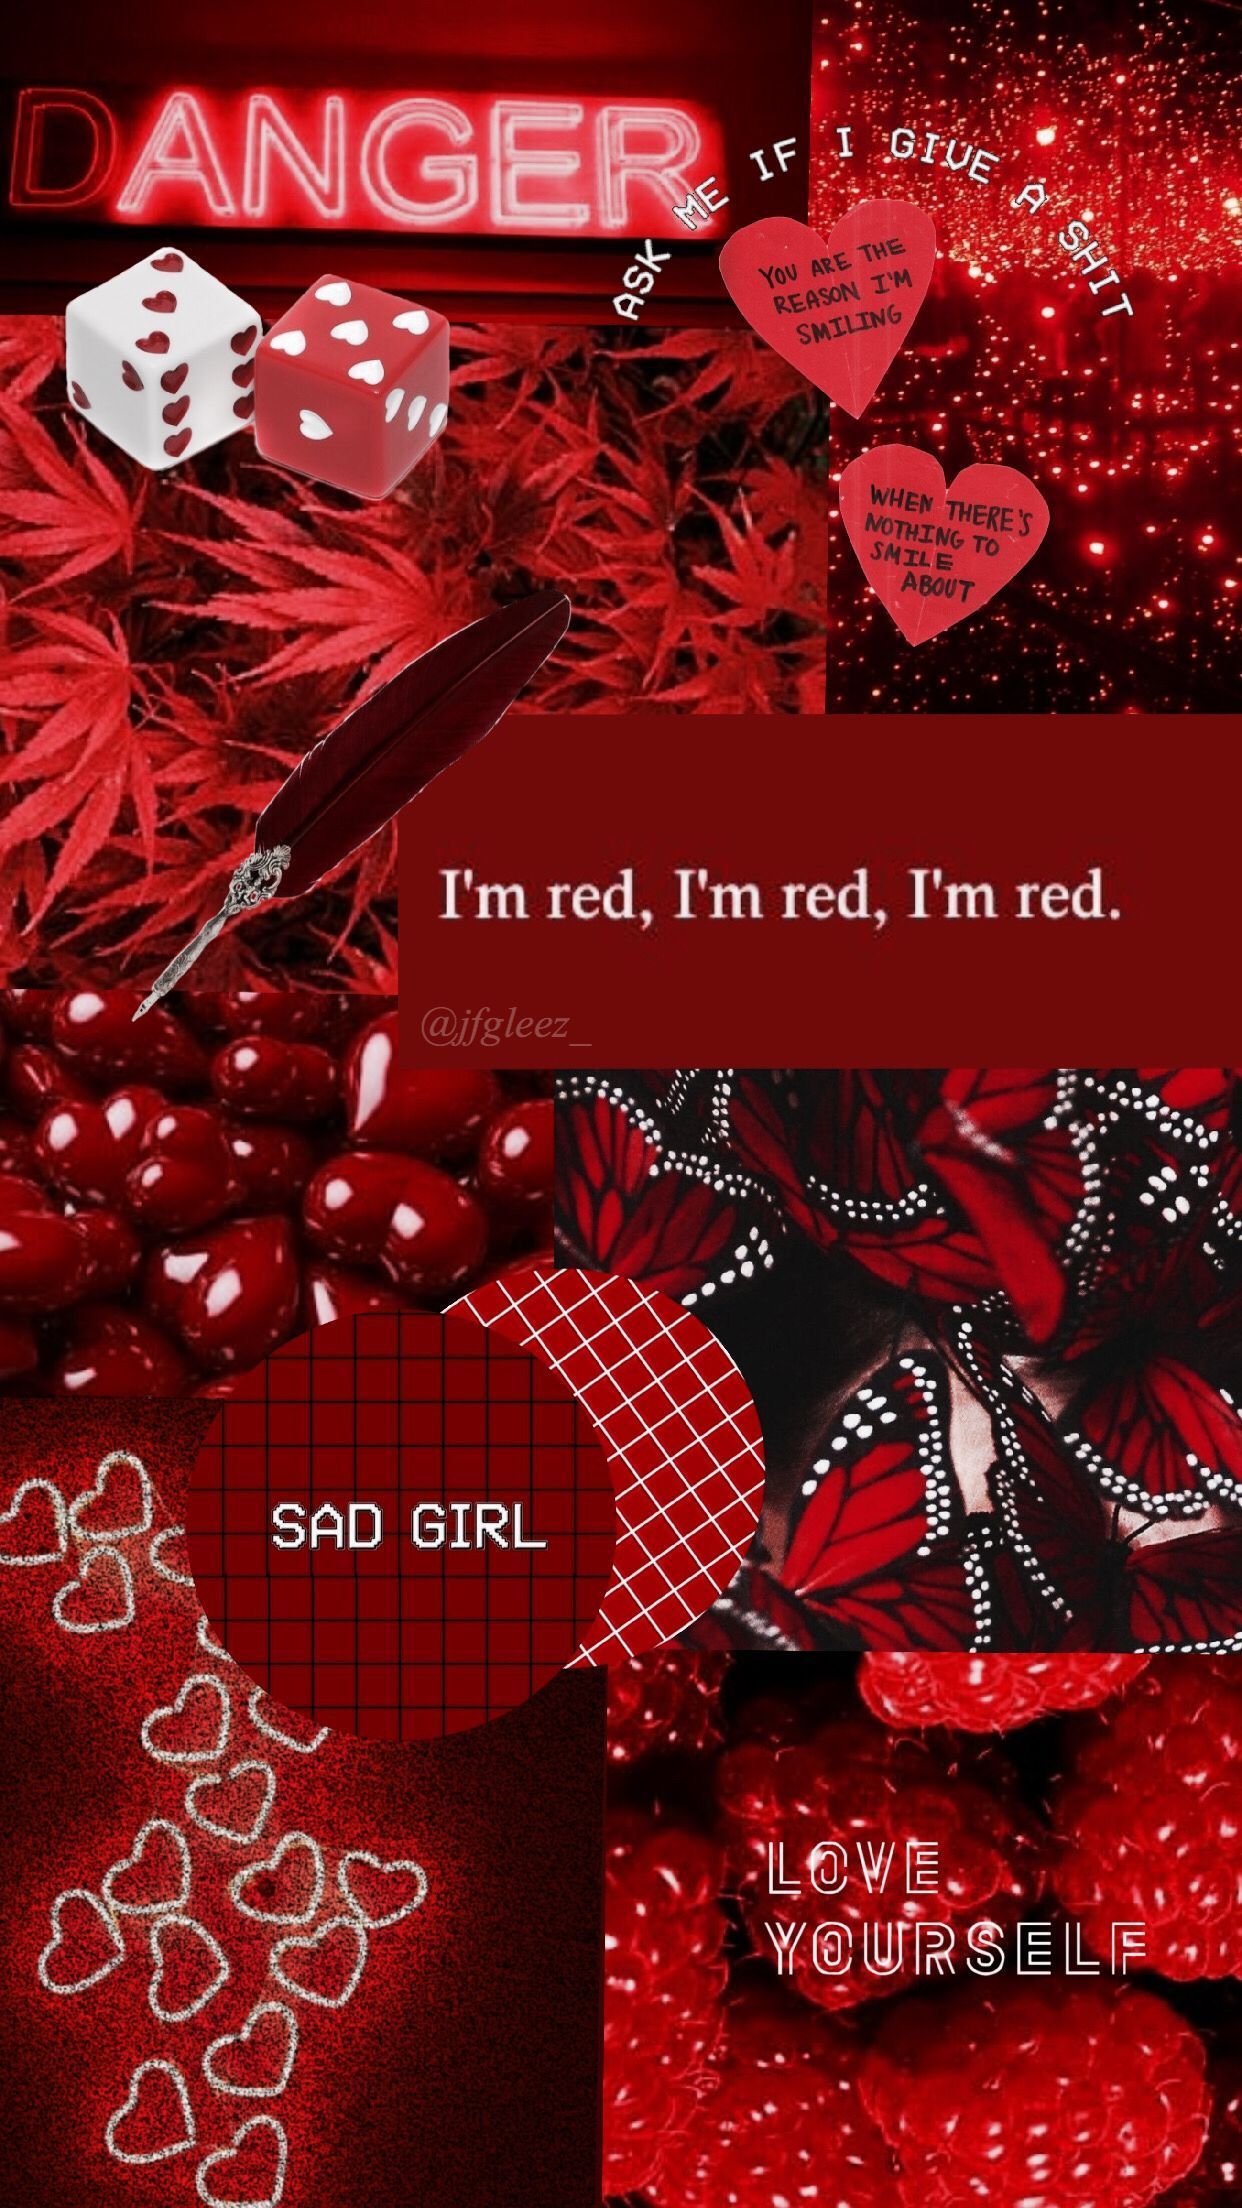 A collage of red hearts and dice - Dark red, Leo, light red, red